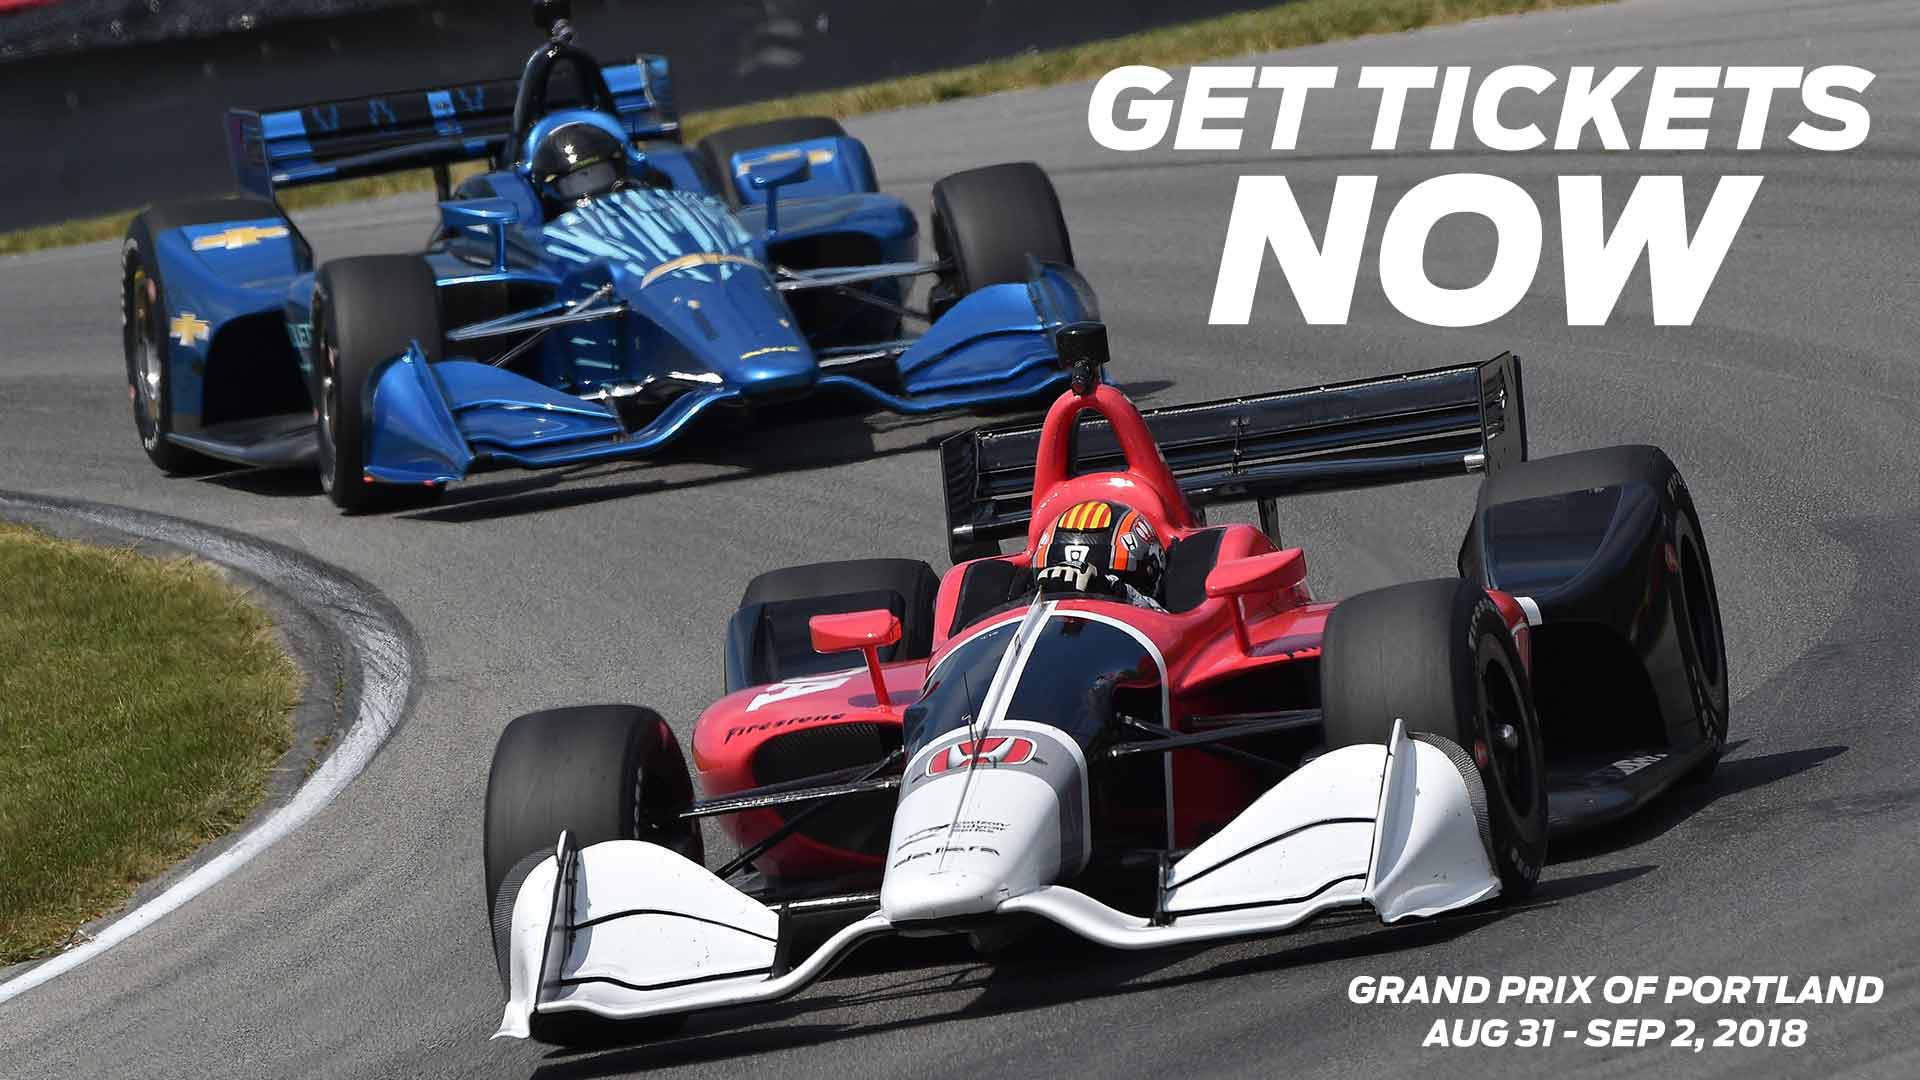 Tickets now on sale for 2018 Grand Prix of Portland